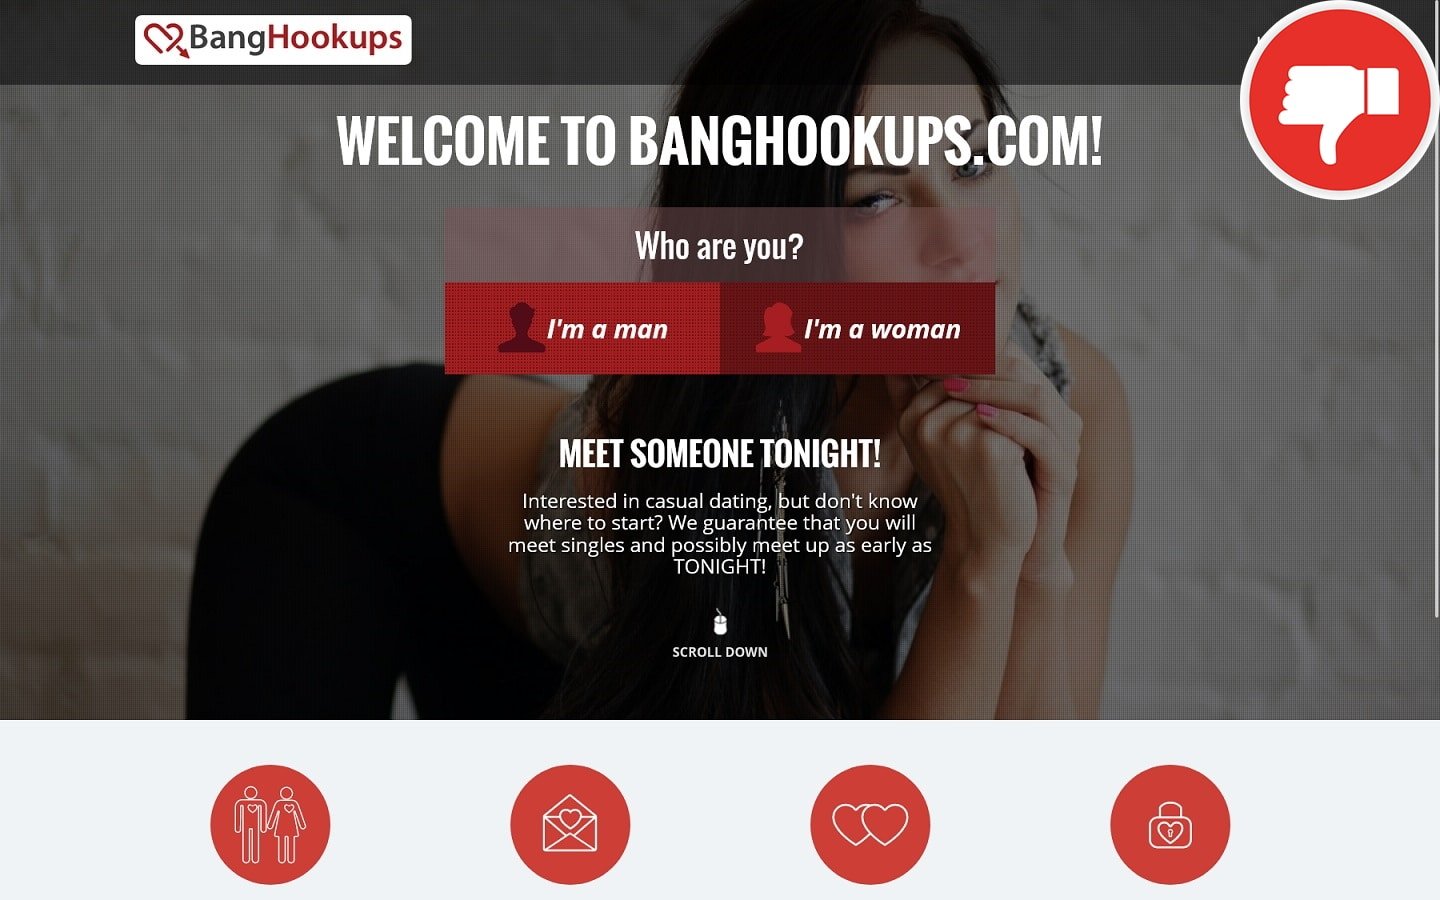 Review BangHookups.com scam experience